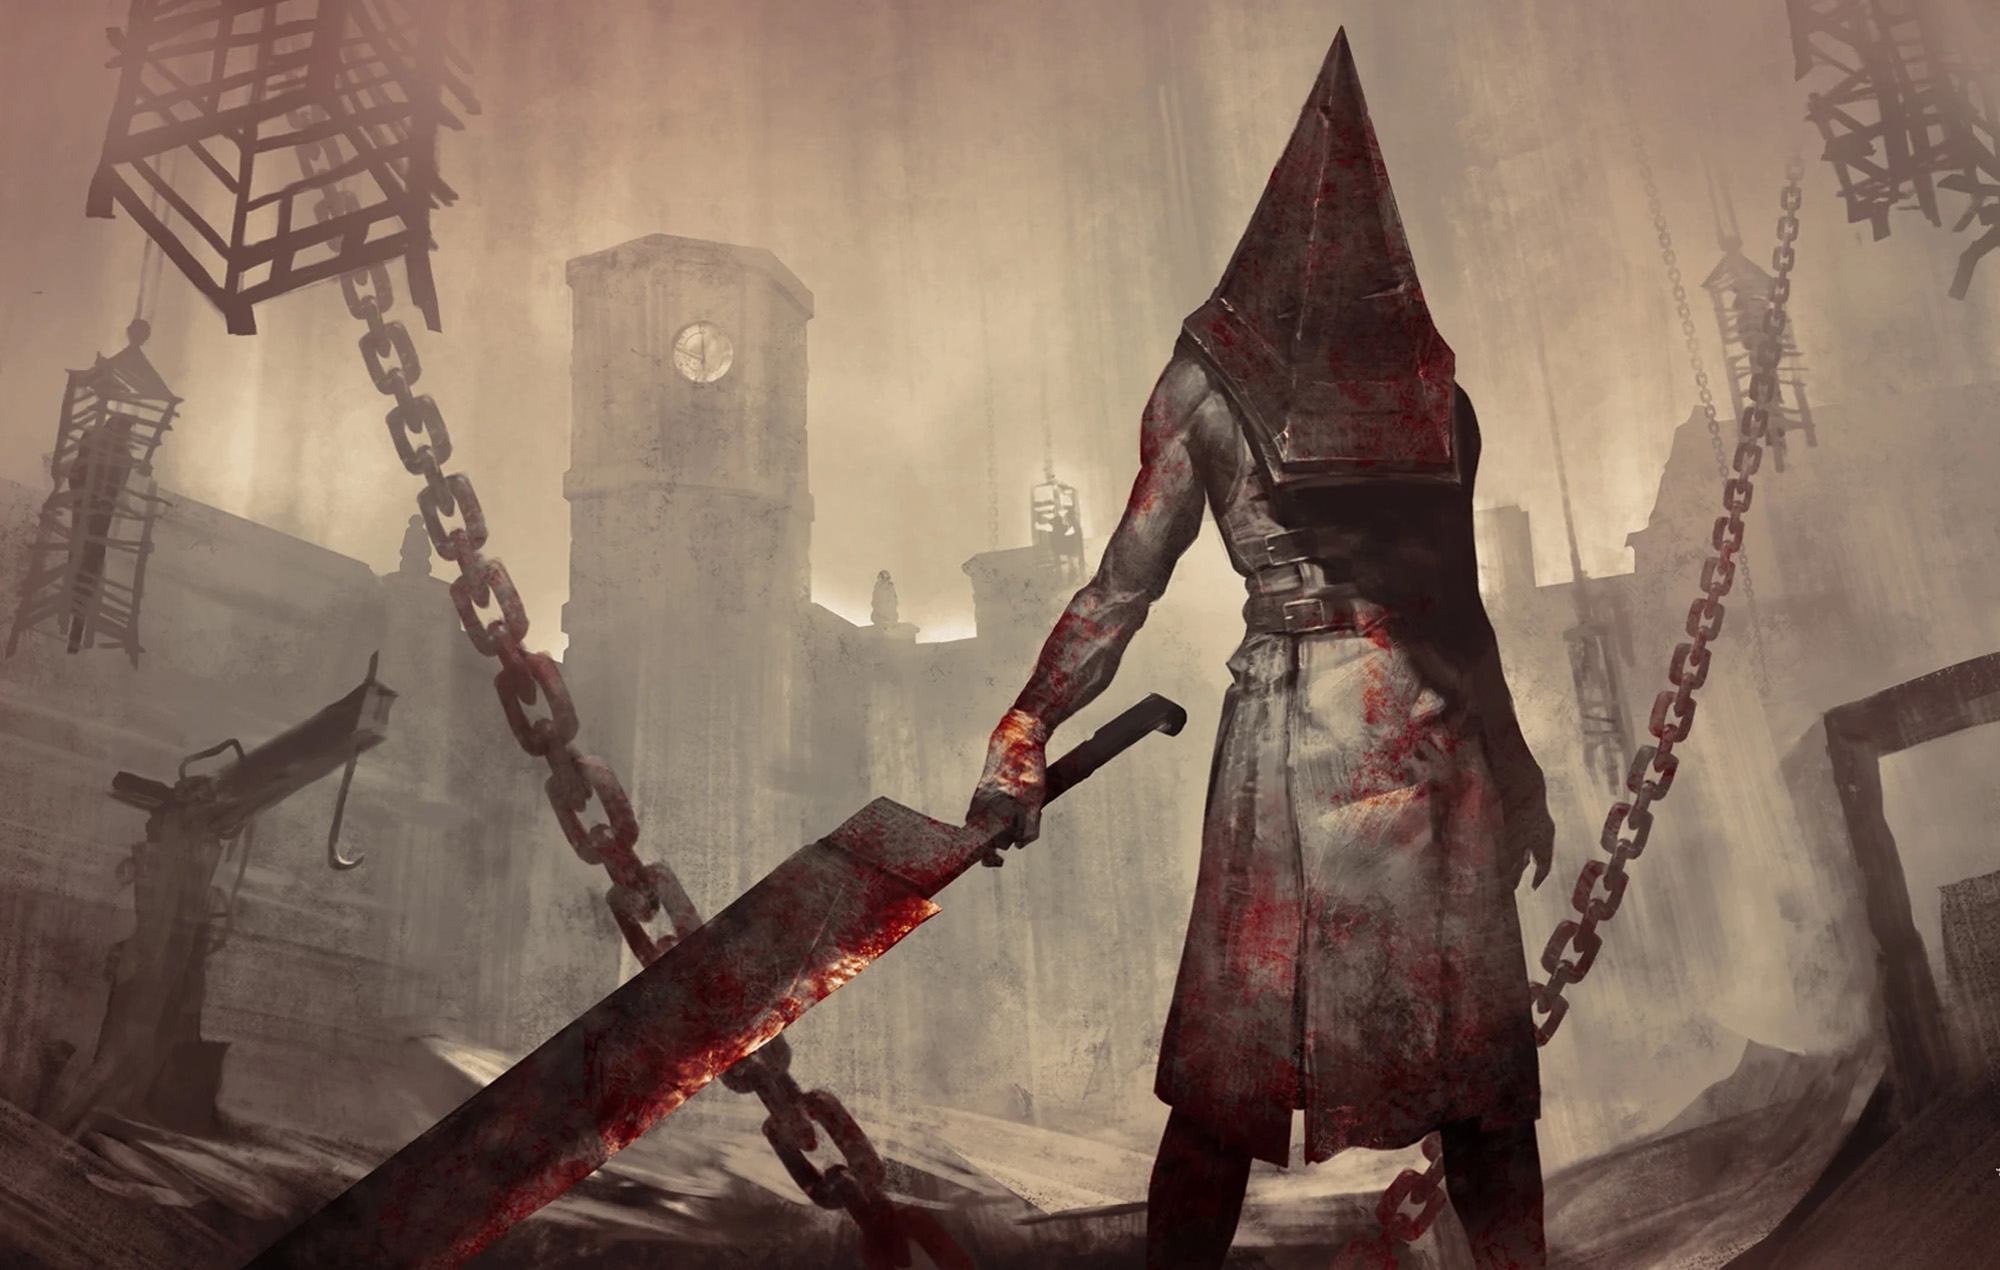 Reports of a Silent Hill 2 remake Pyramid Head origin story fill